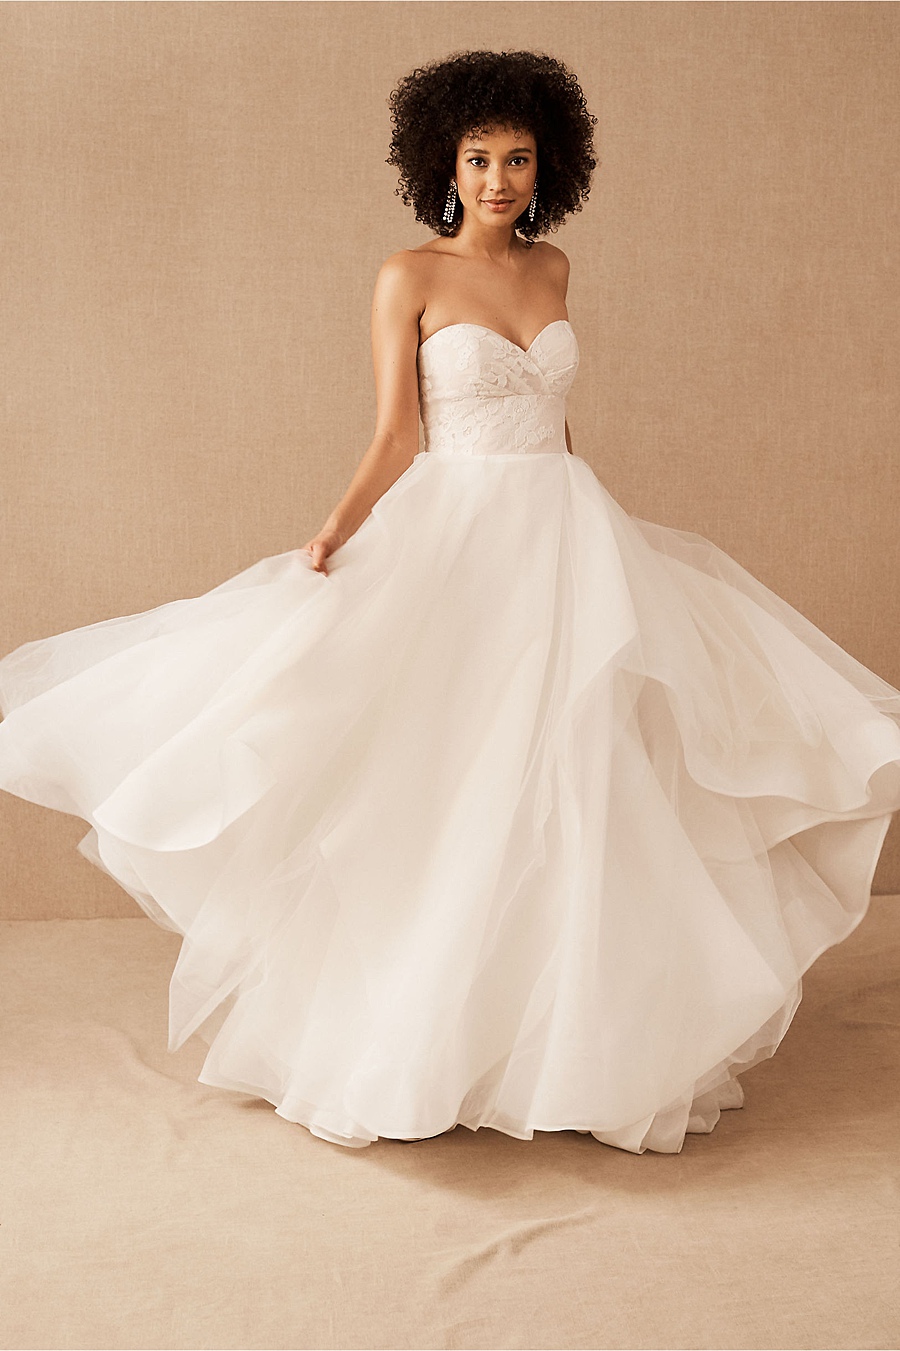 How To Buy A Cheap And Legit Wedding Dress Online Without Getting